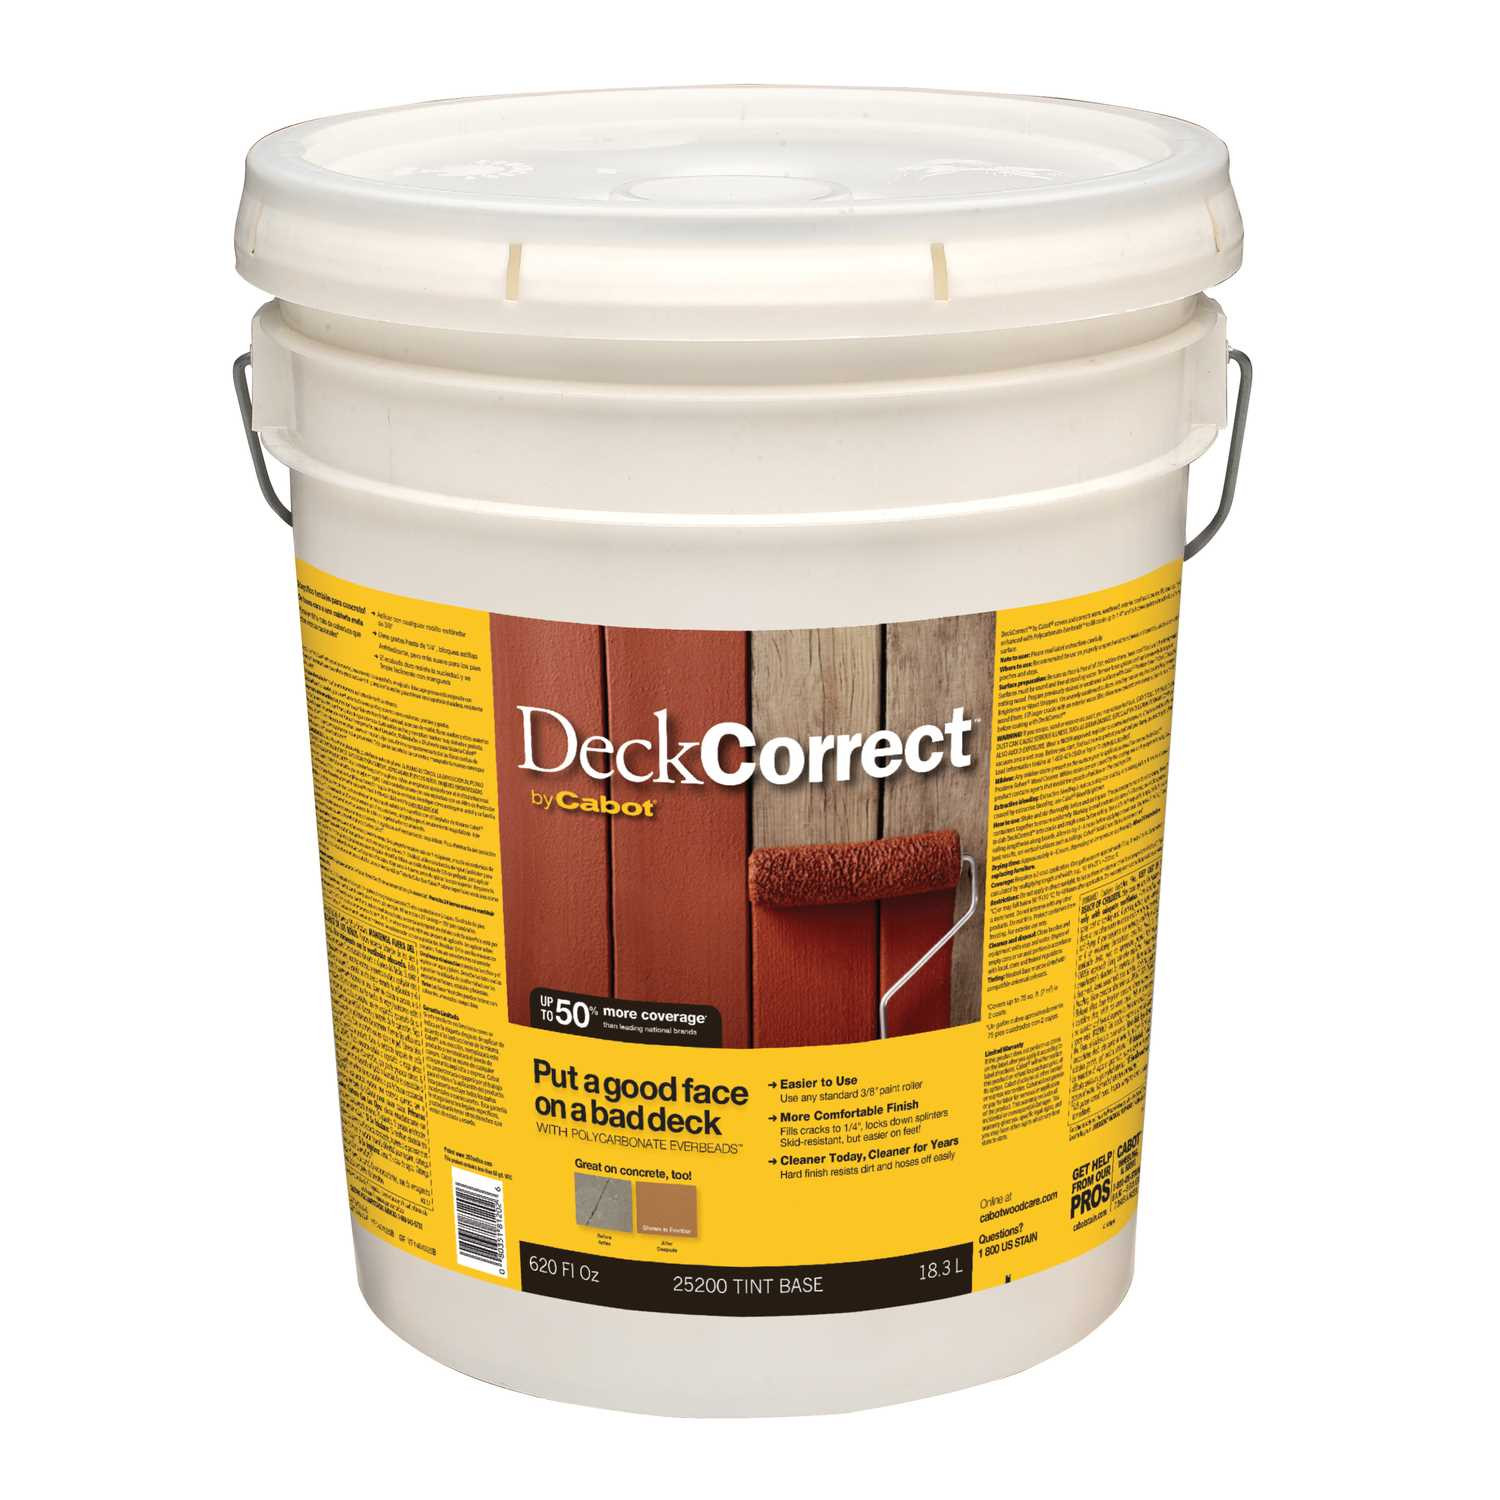 Ace Hardware Deck Paint
 Cabot DeckCorrect Solid Tint Base Acrylic Deck Stain 5 gal